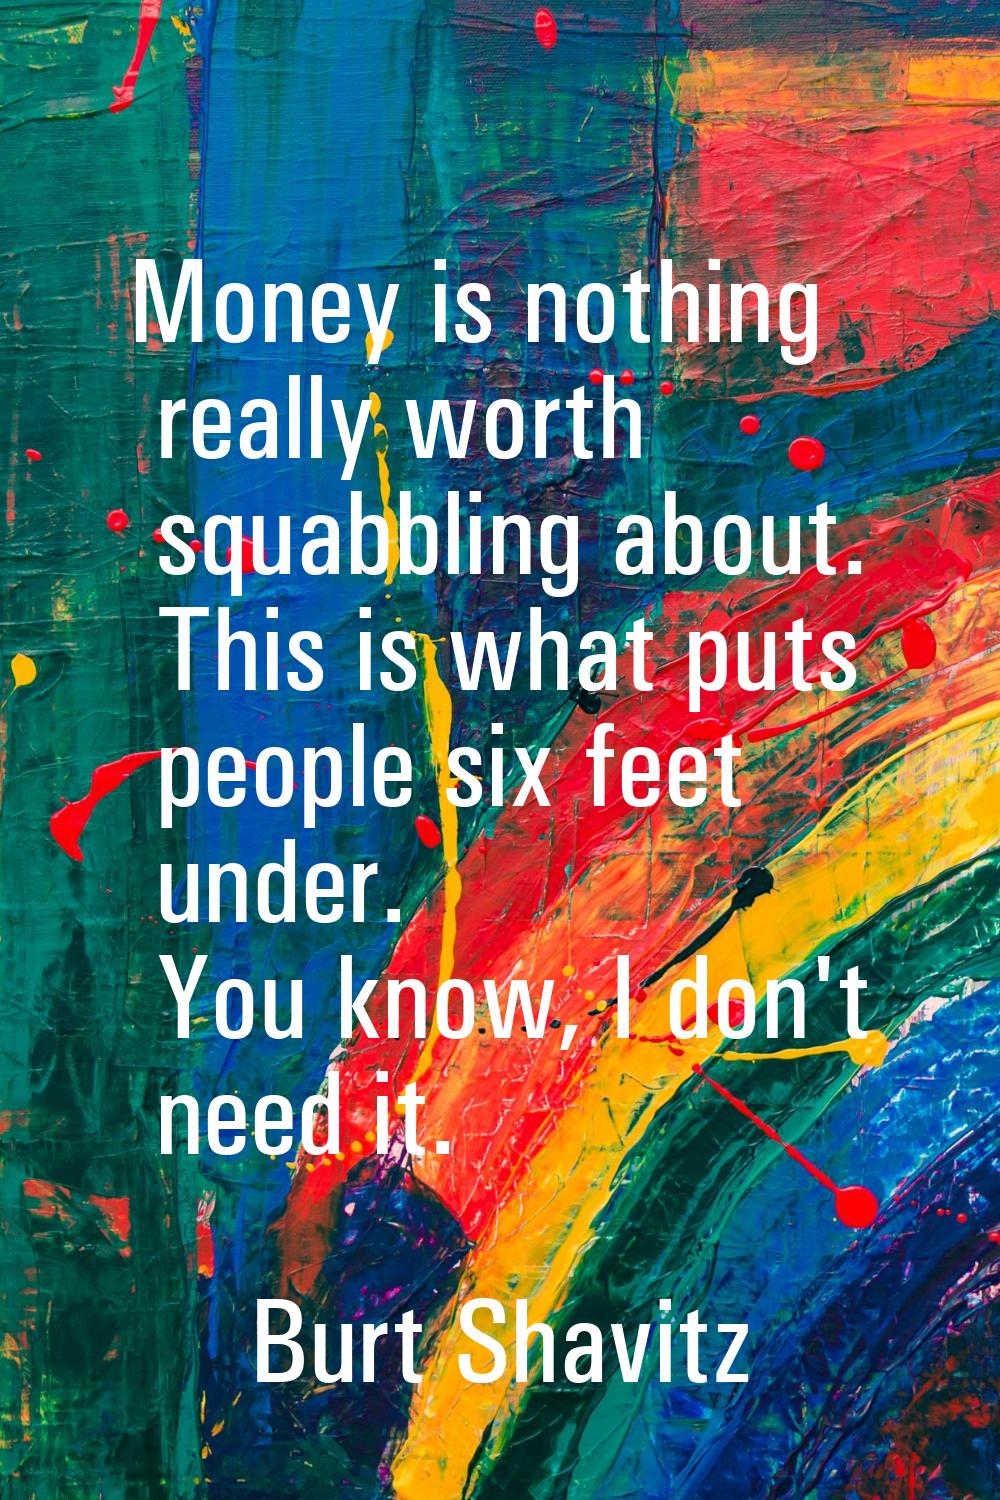 Money is nothing really worth squabbling about. This is what puts people six feet under. You know, 